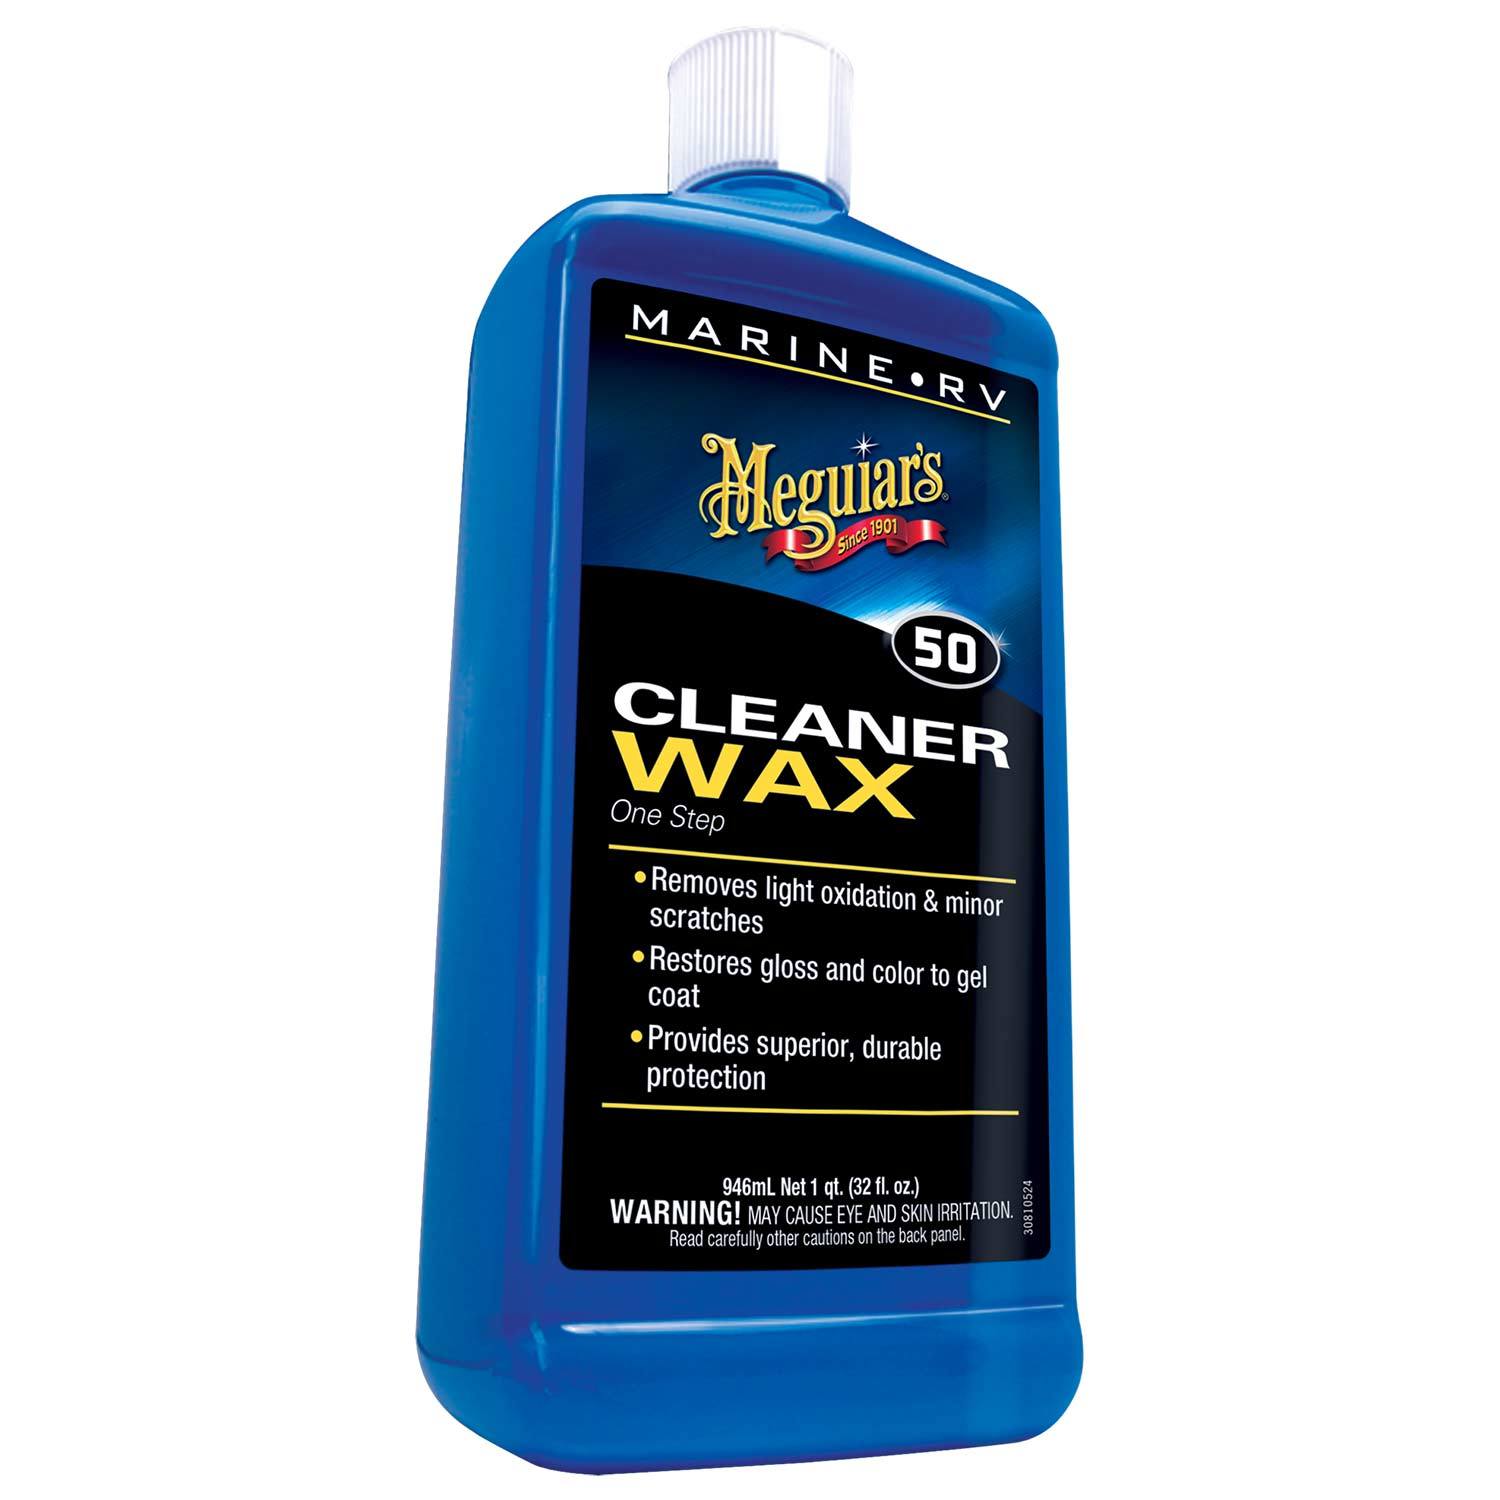 California Cover All by Superior Products- Automotive Tire Shine Spray &  Professional Grade -Tire Dressing - High